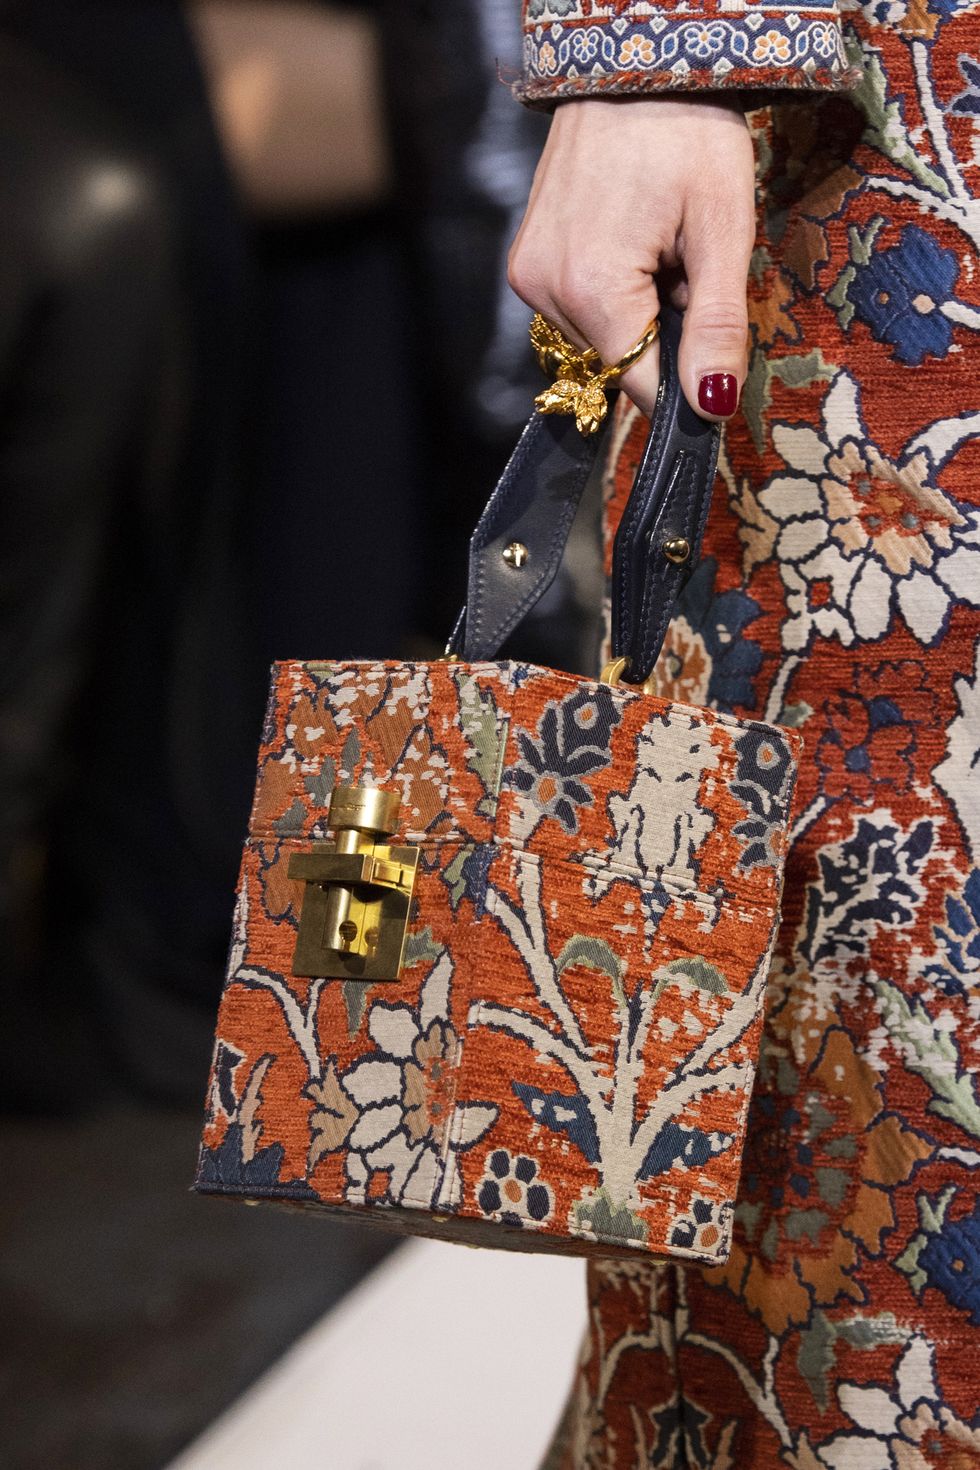 Top 2019 Bag Trends - New Handbag Trends Straight From the Runway